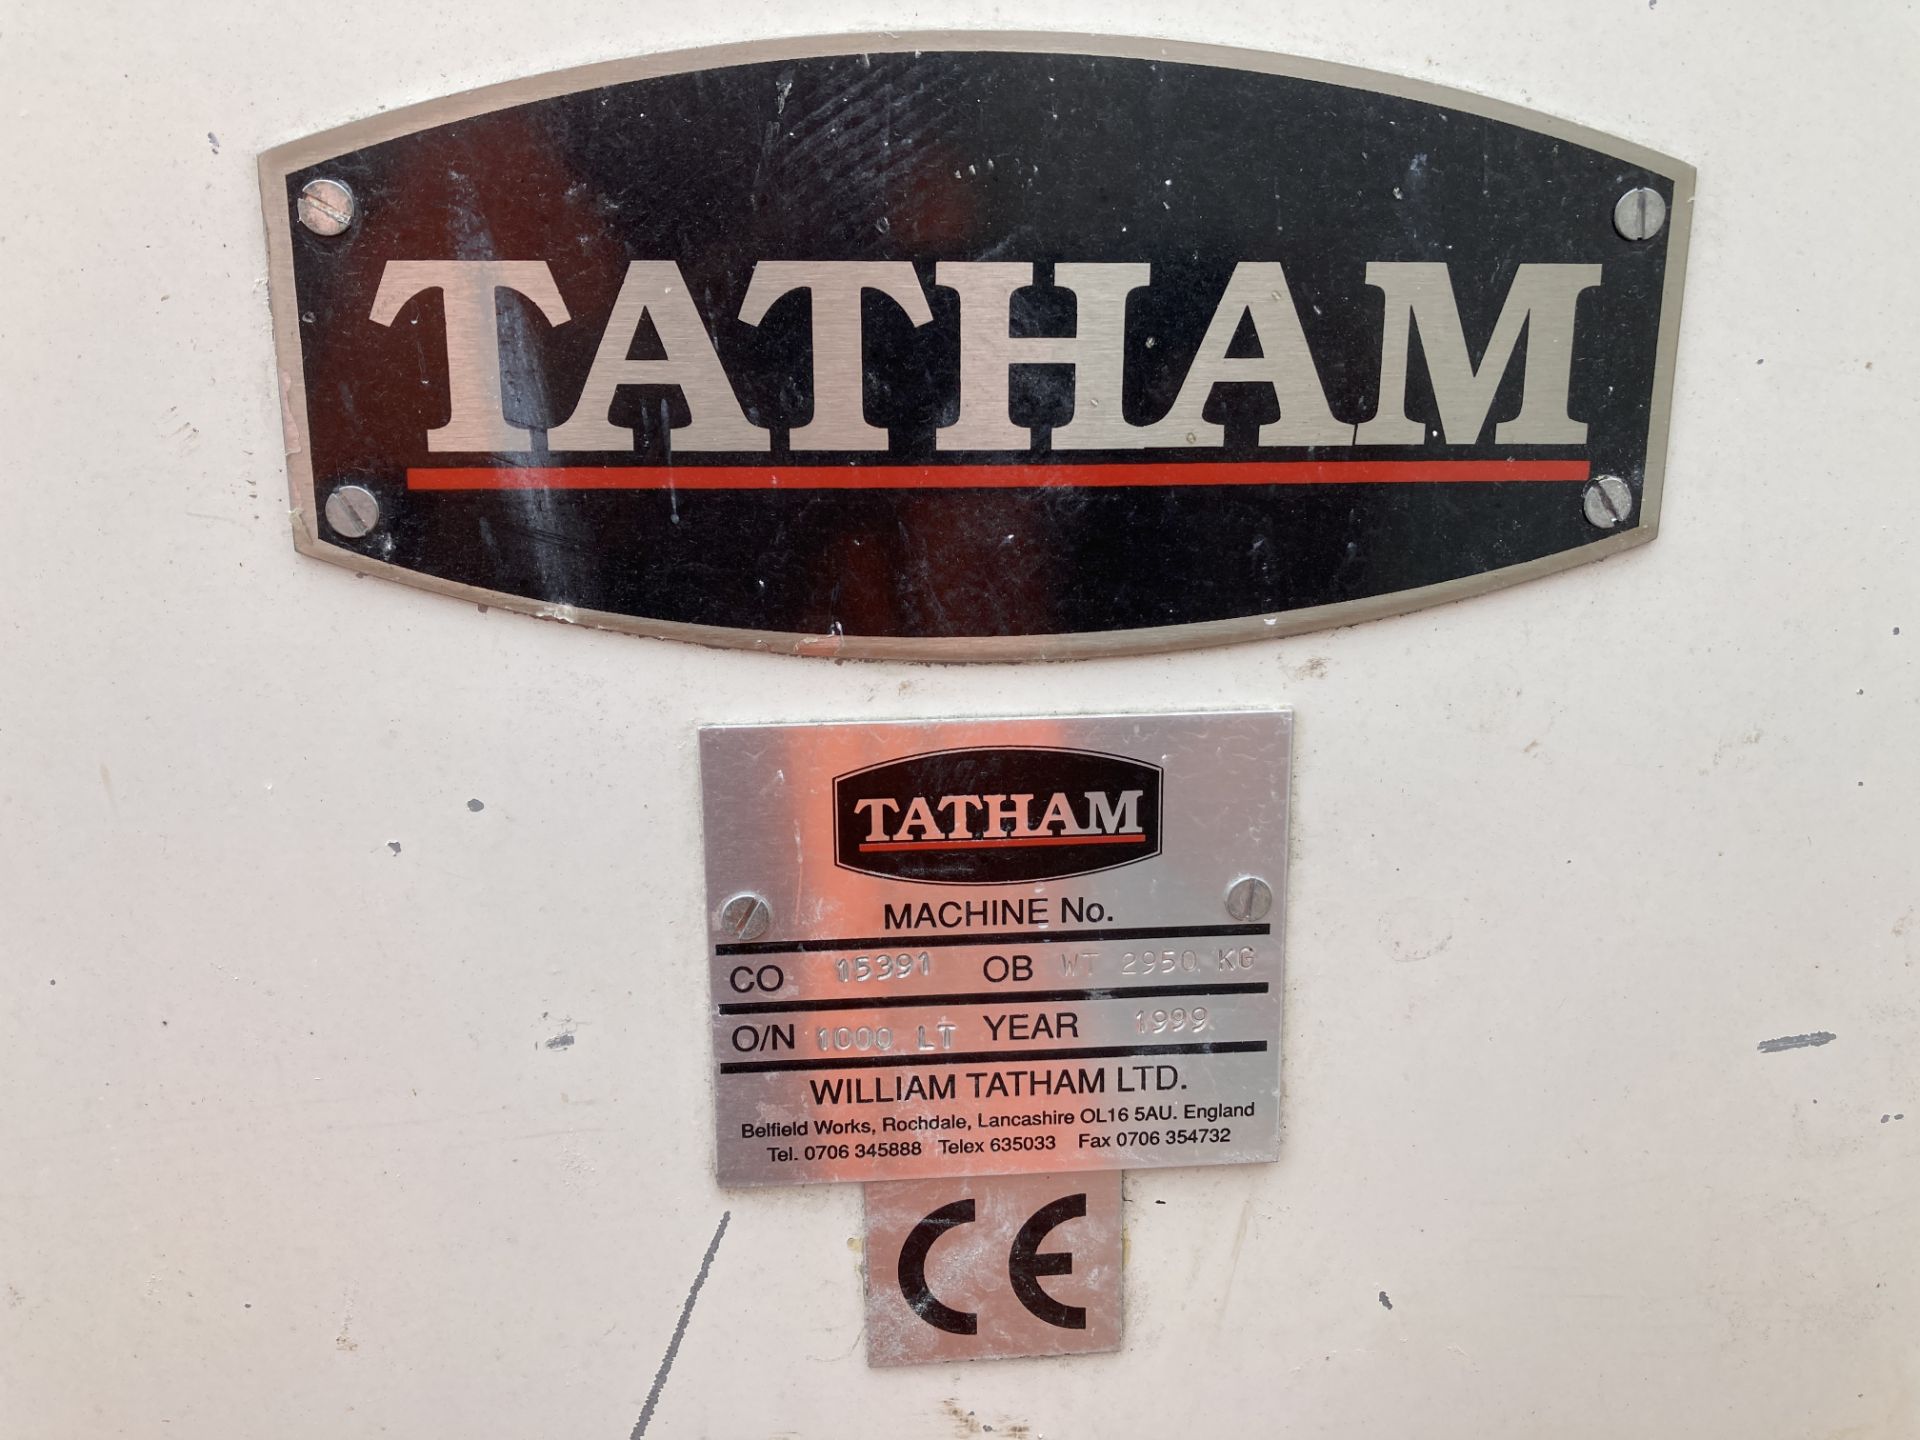 Tatham approx. 1,000 litre 304 STAINLESS STEEL TWIN SHAFT PADDLE MIXER, serial no. 15391, year of - Bild 6 aus 6